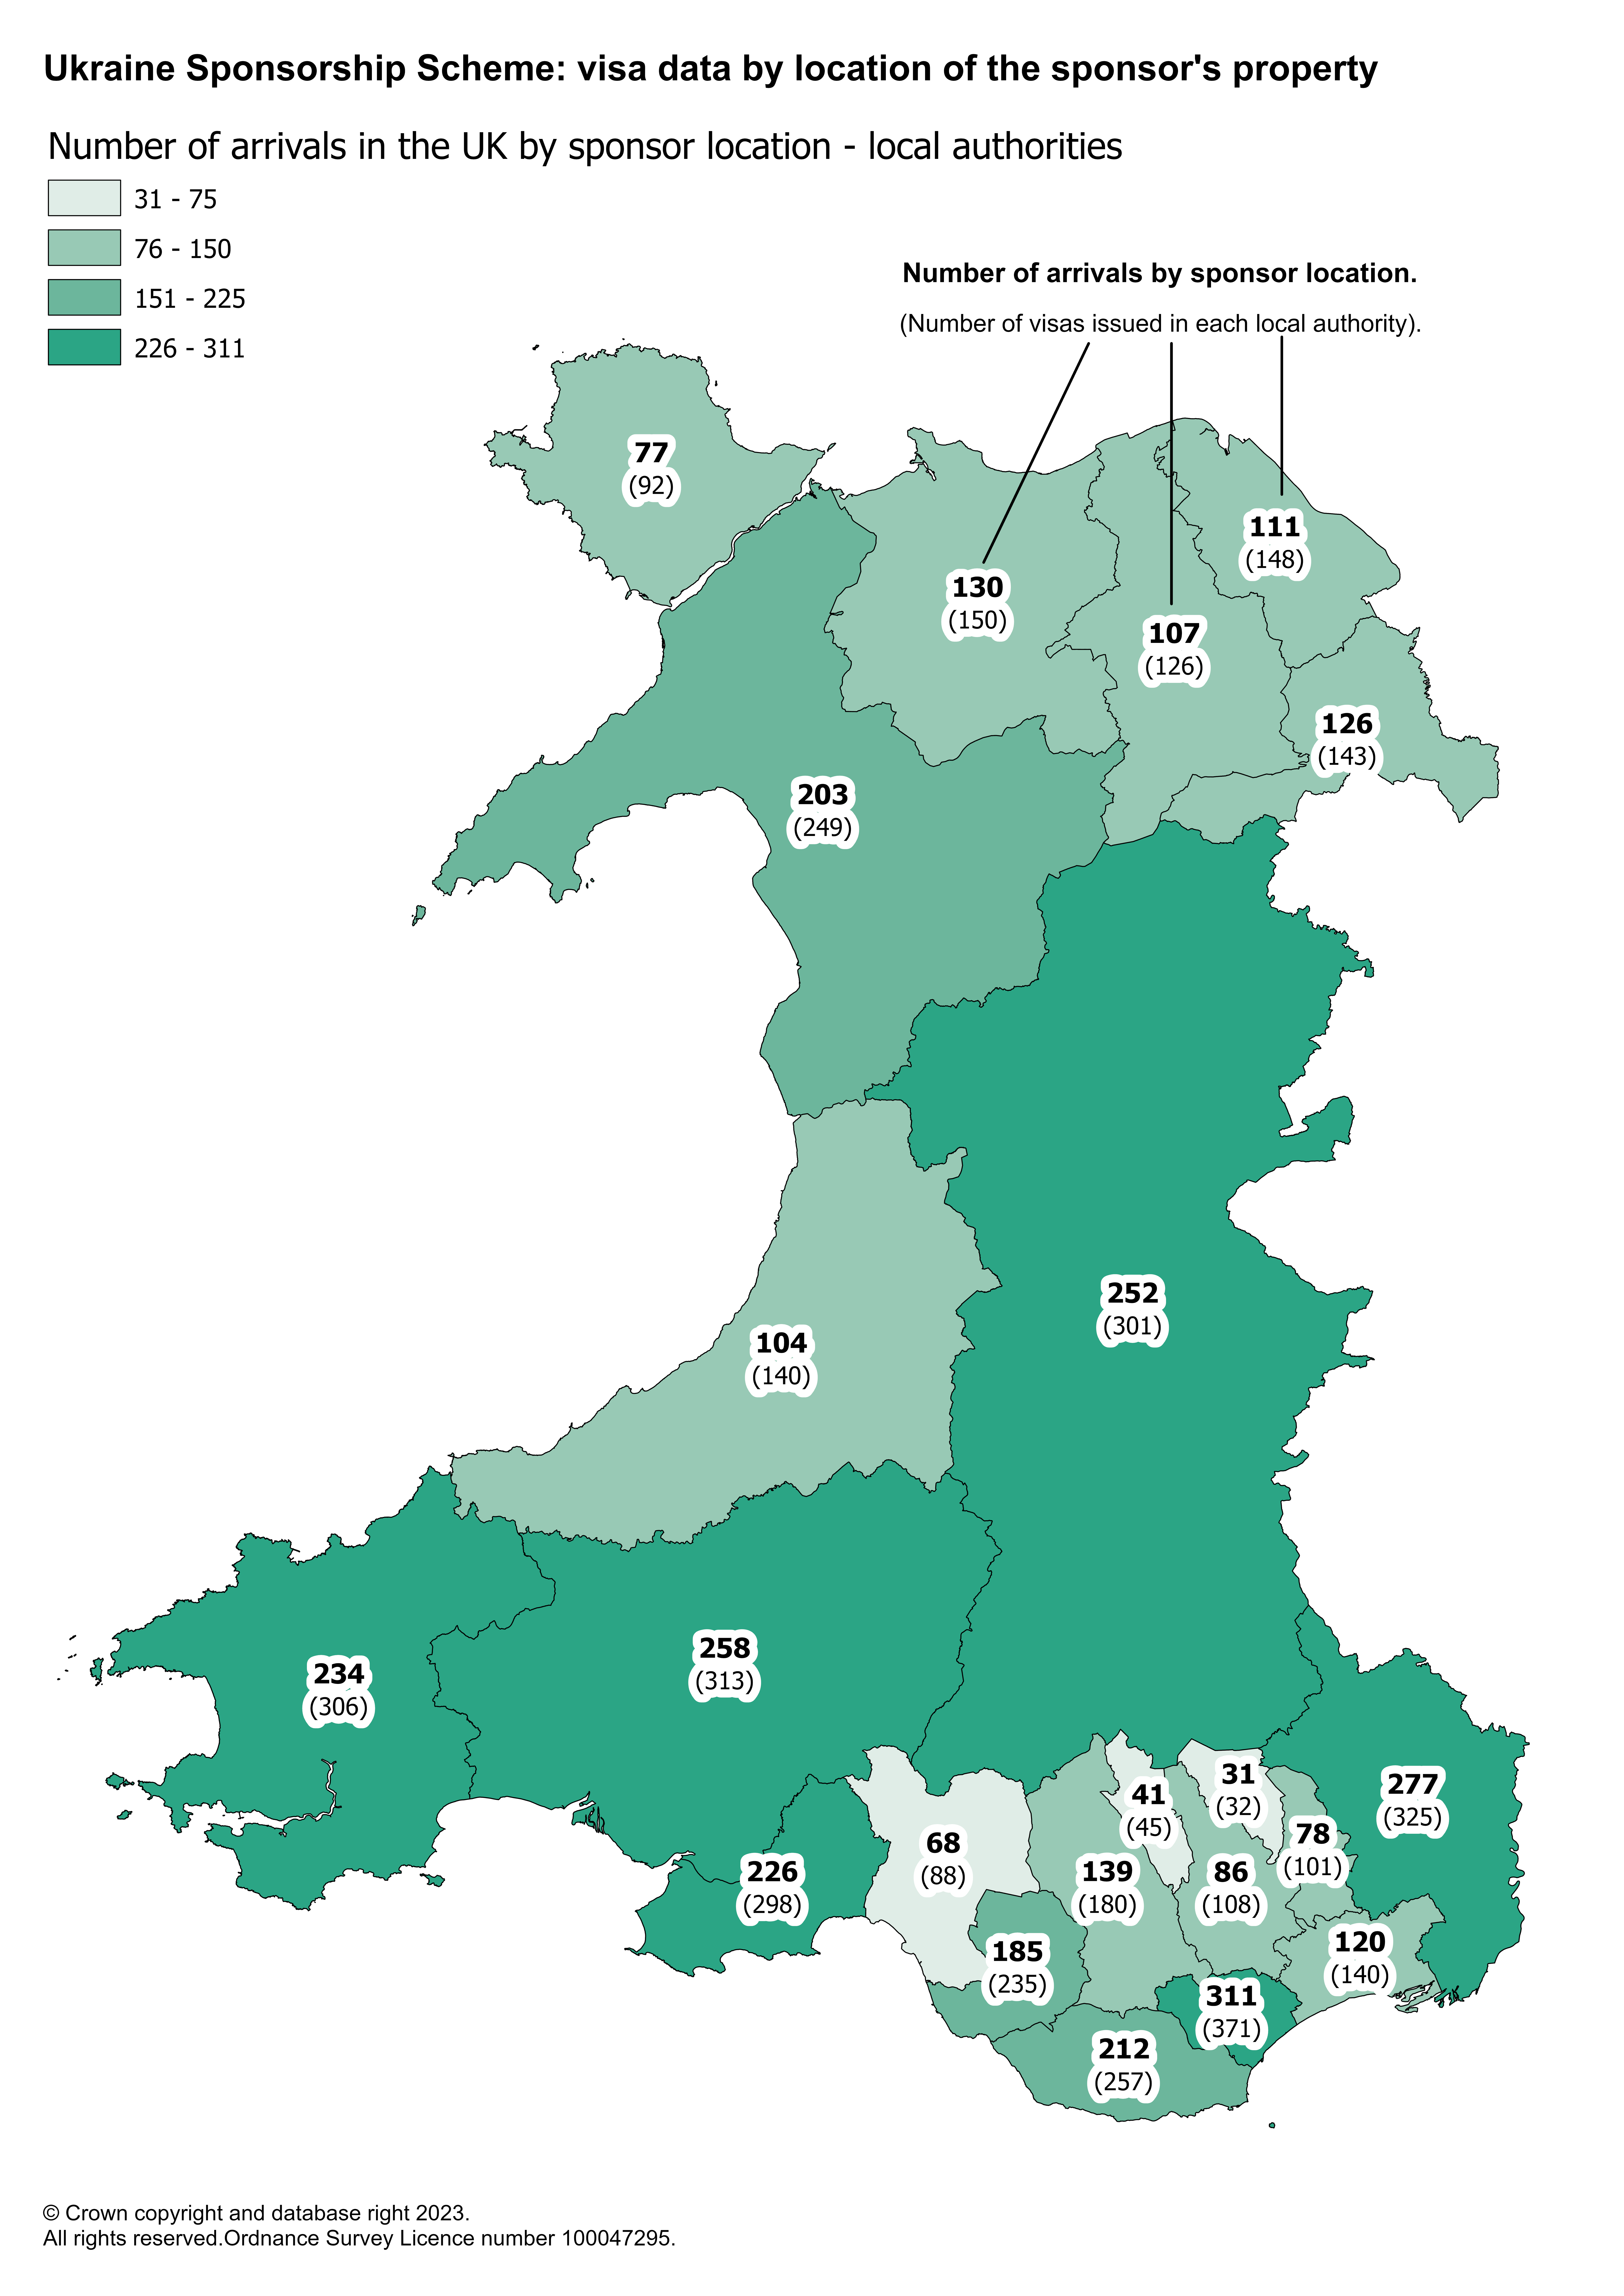 The infographic shows that refugees are currently being supported in every Welsh local authority, including in rural areas. The number of refugees in each area is shown on a map of Wales.